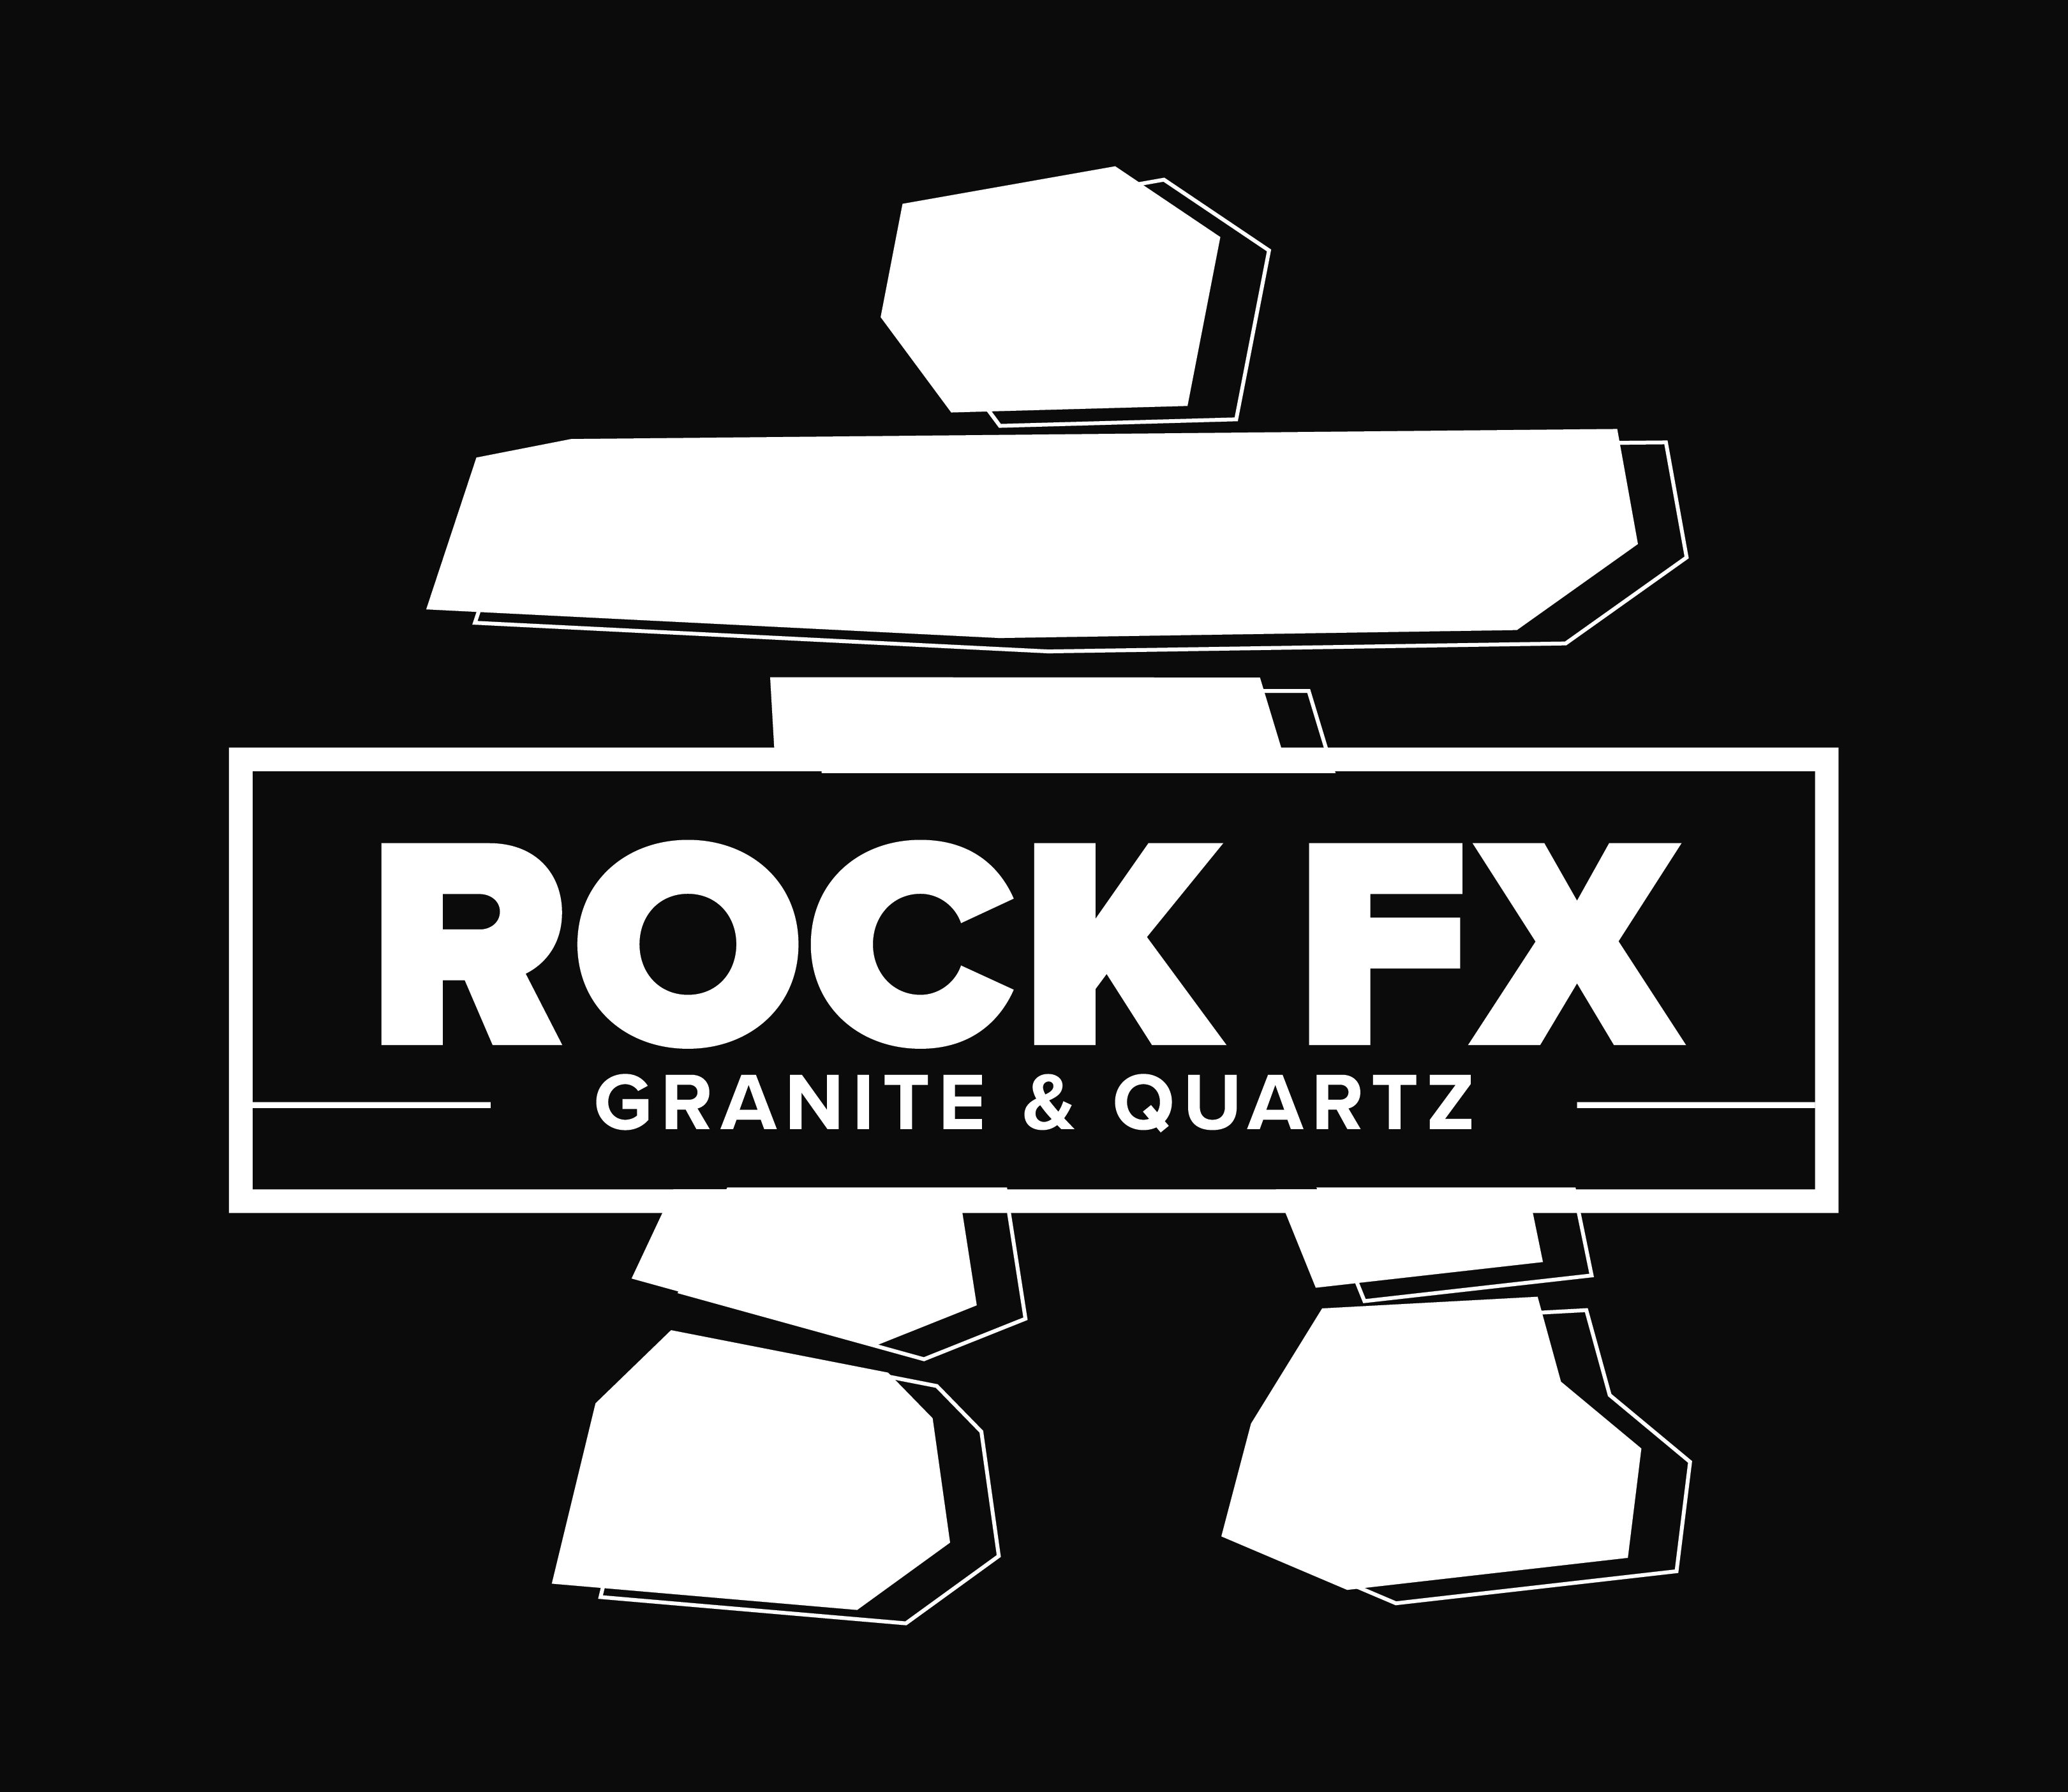 The Rock FX business logo in black and white